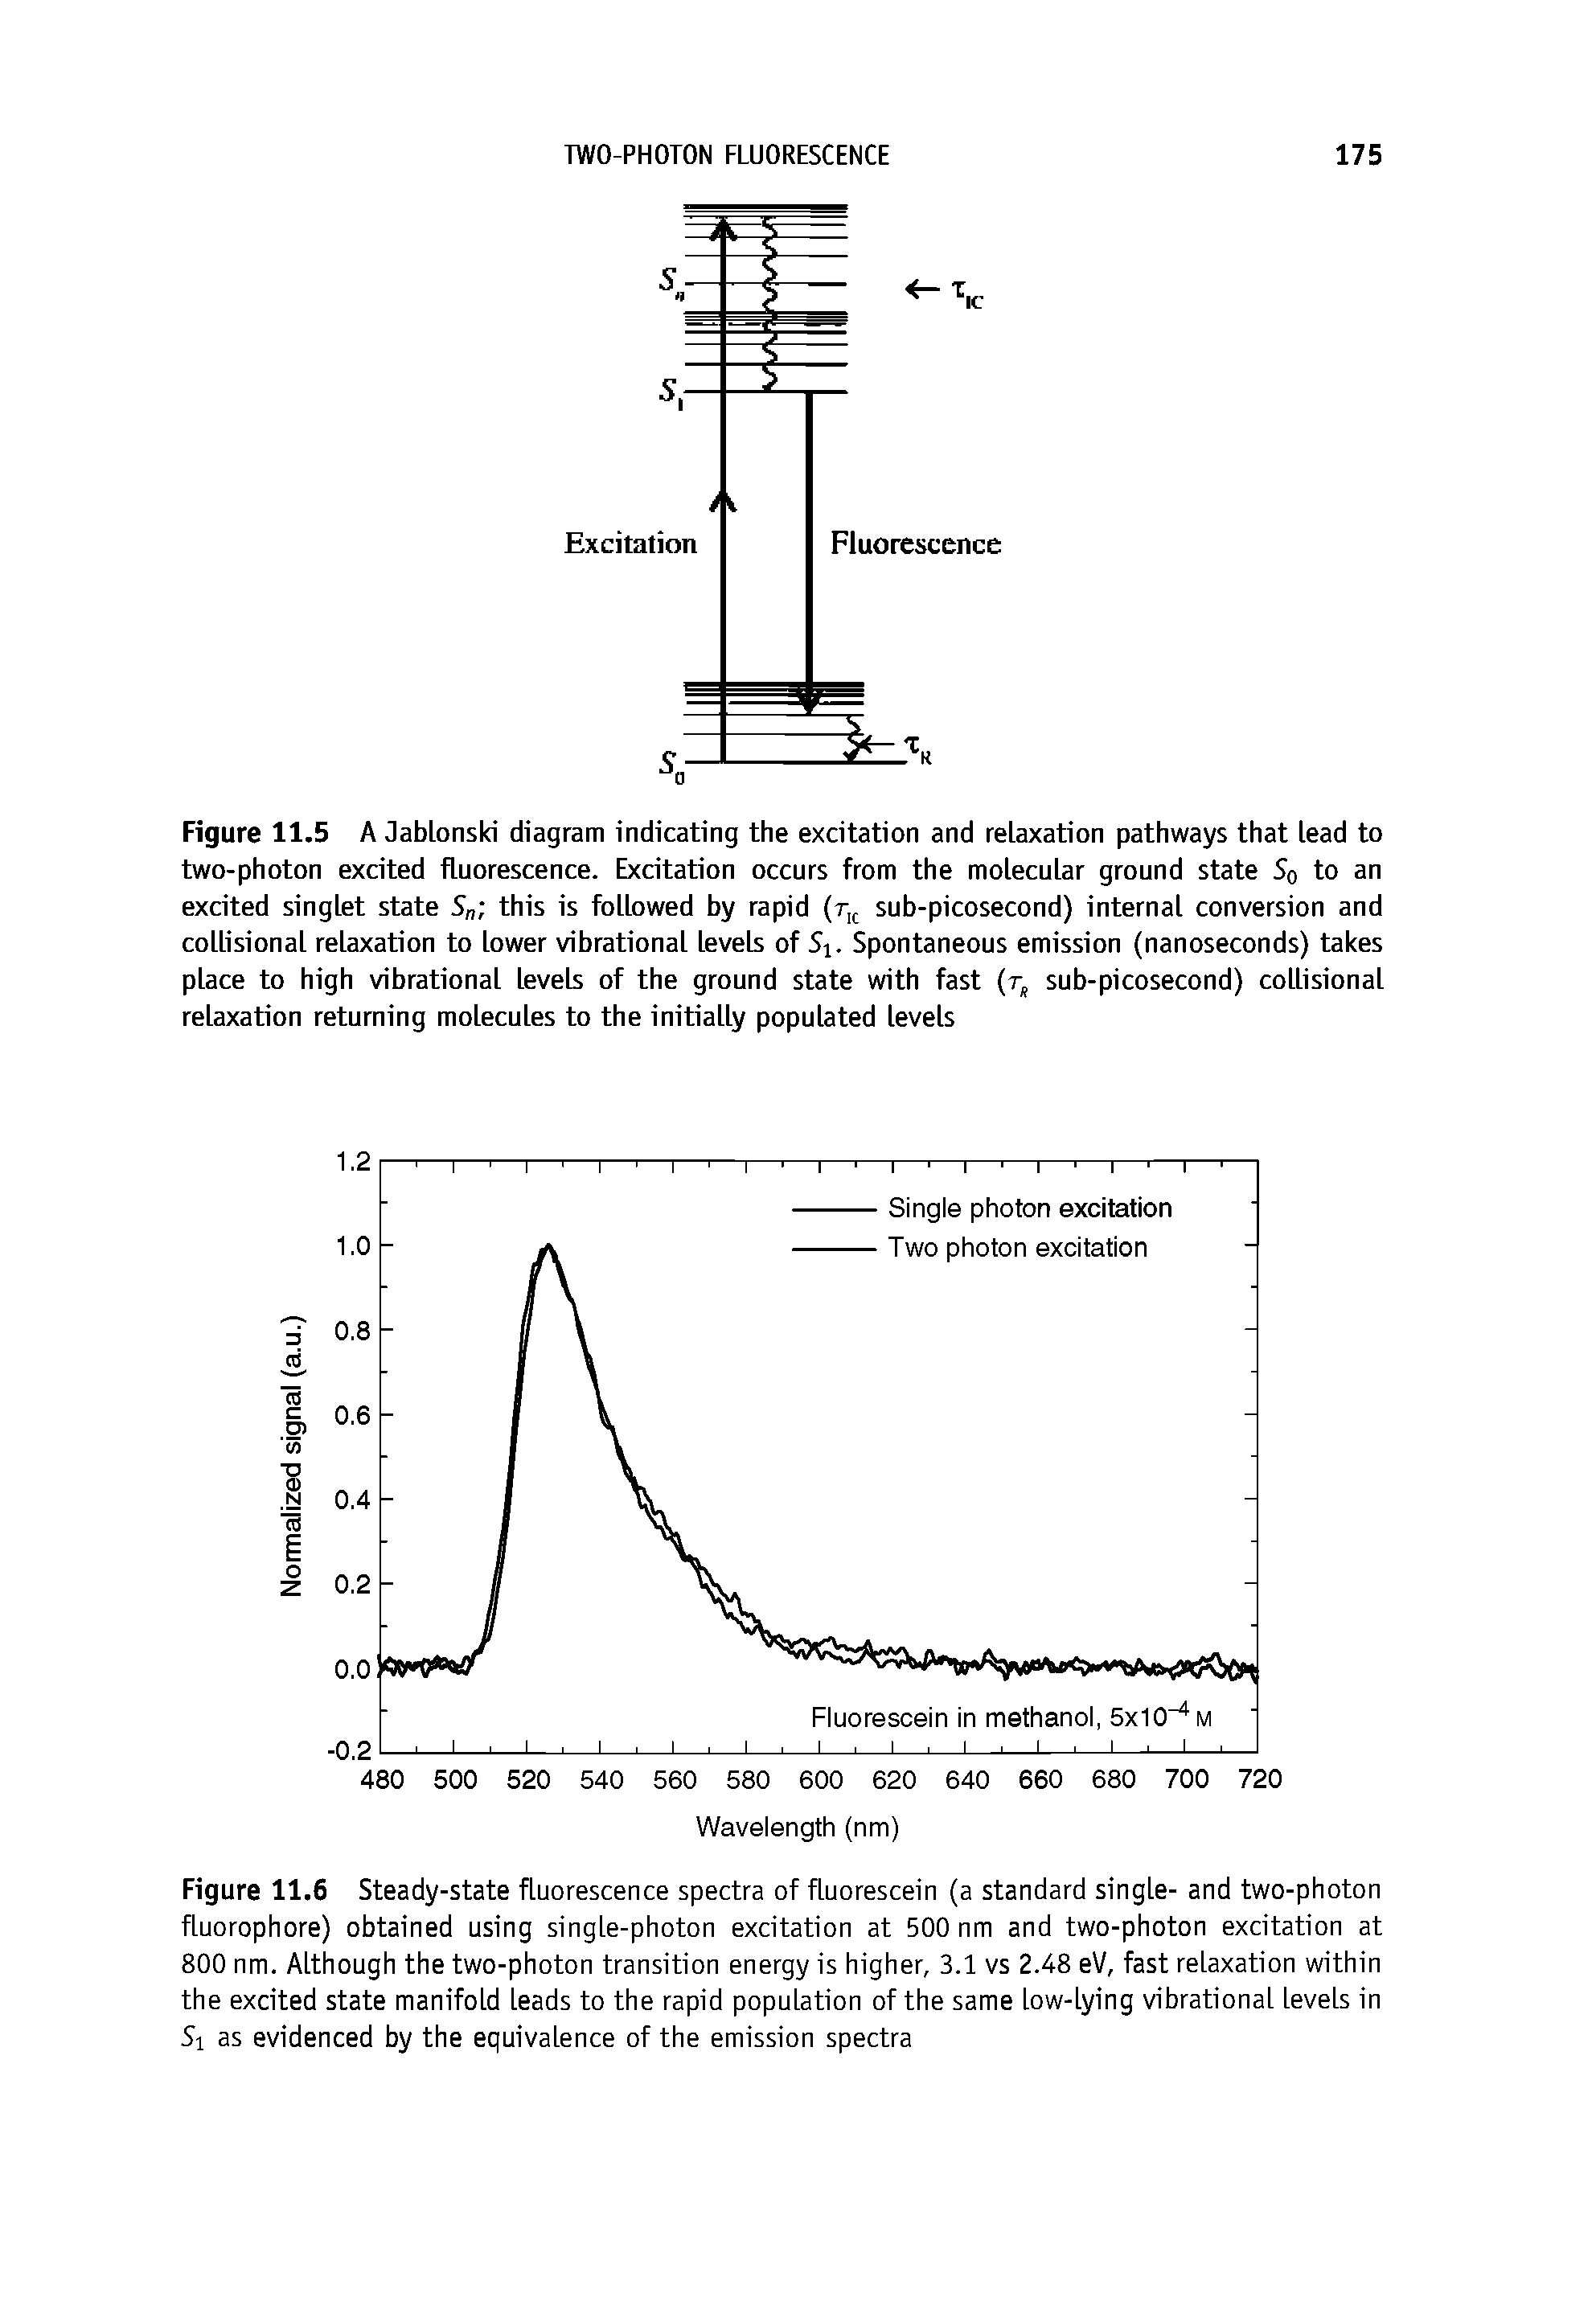 Figure 11.6 Steady-state fluorescence spectra of fluorescein (a standard single- and two-photon fluorophore) obtained using single-photon excitation at 500 nm and two-photon excitation at 800 nm. Although the two-photon transition energy is higher, 3.1 vs 2.48 eV, fast relaxation within the excited state manifold leads to the rapid population of the same low-lying vibrational levels in Si as evidenced by the equivalence of the emission spectra...